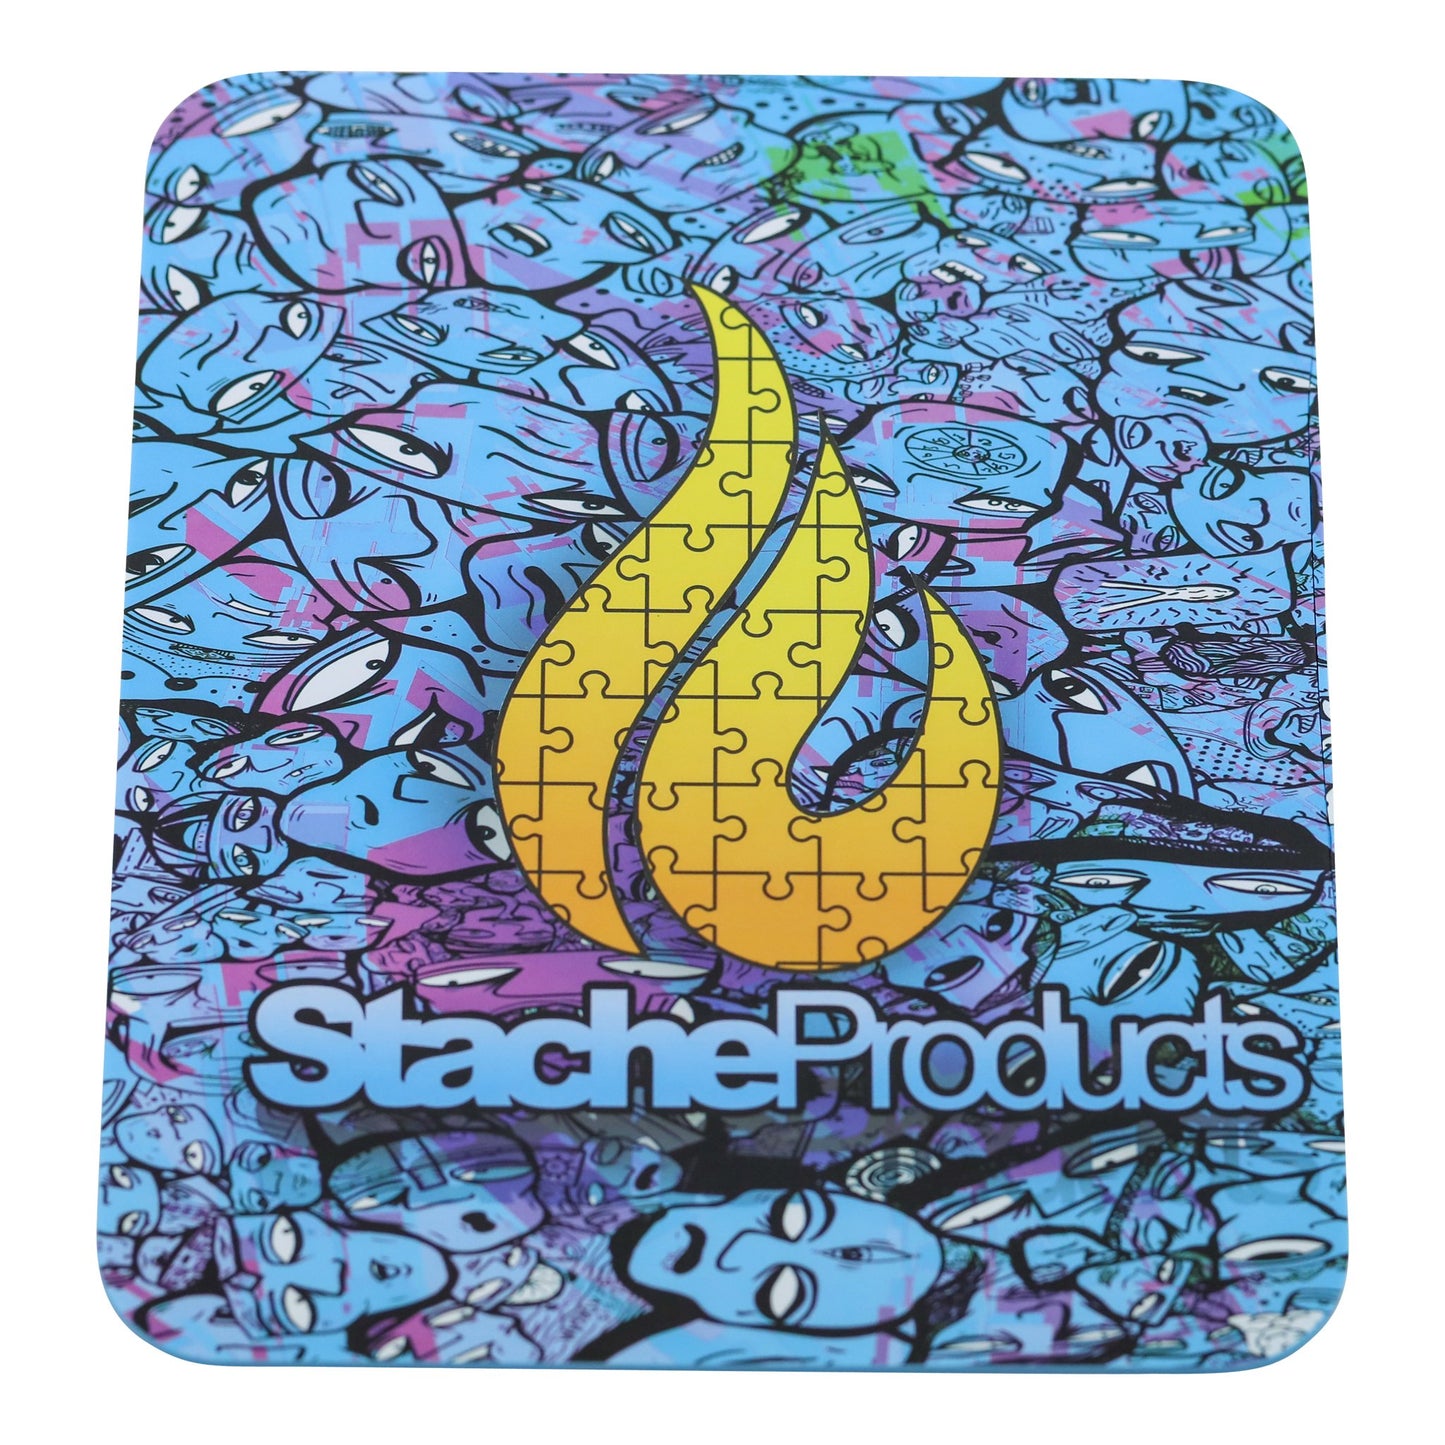 Stache Products Silicone Dab Mat - 8in Blue